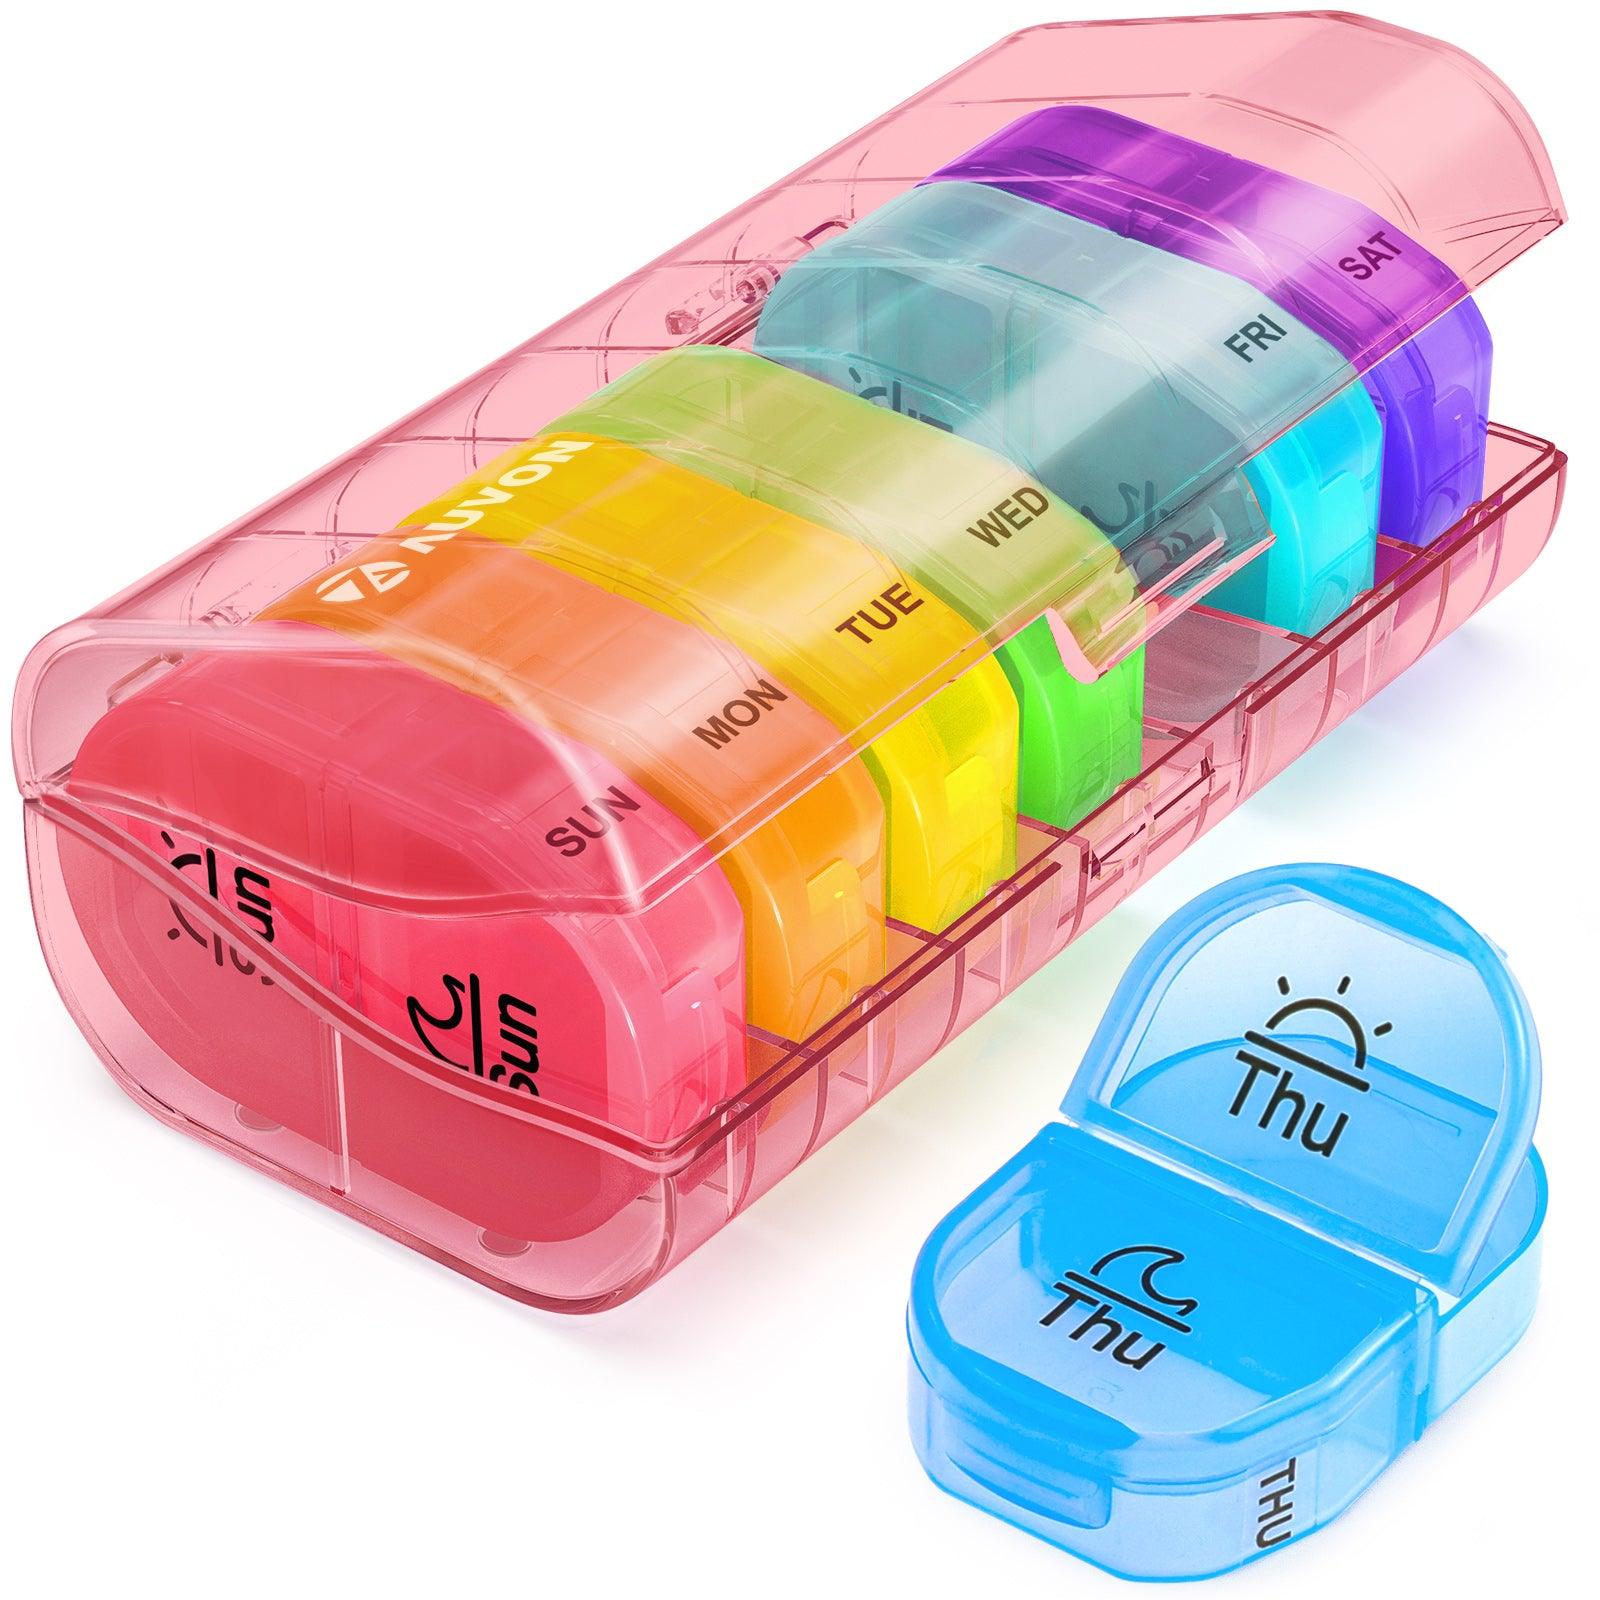 Portable Weekly 7-Day Pill Organizer, Travel Medicine Box, Rainbow Color,  BPA Free with Easy Push Button Design Case Holder for Pills, Vitamin